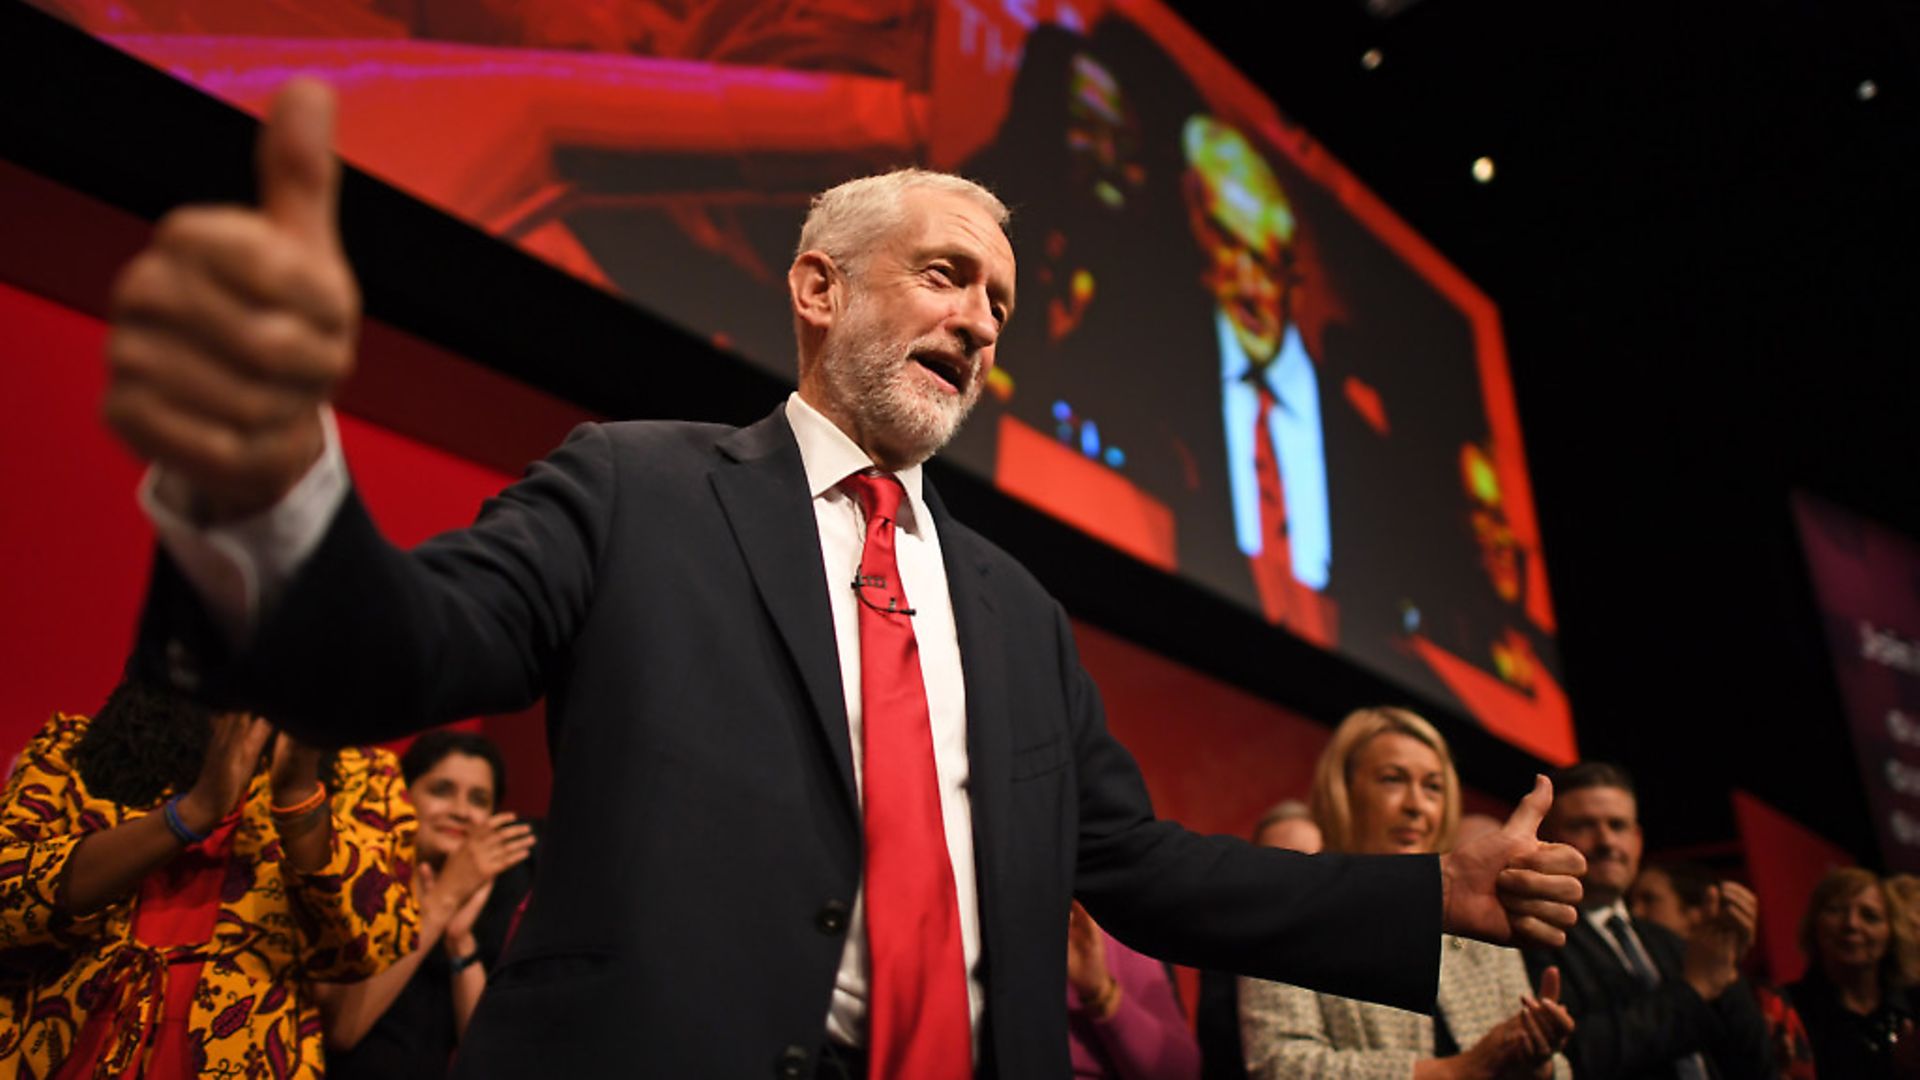 Labour leader Jeremy Corbyn is joined by the shadow cabinet on stage. Photograph: Victoria Jones/PA. - Credit: PA Wire/PA Images